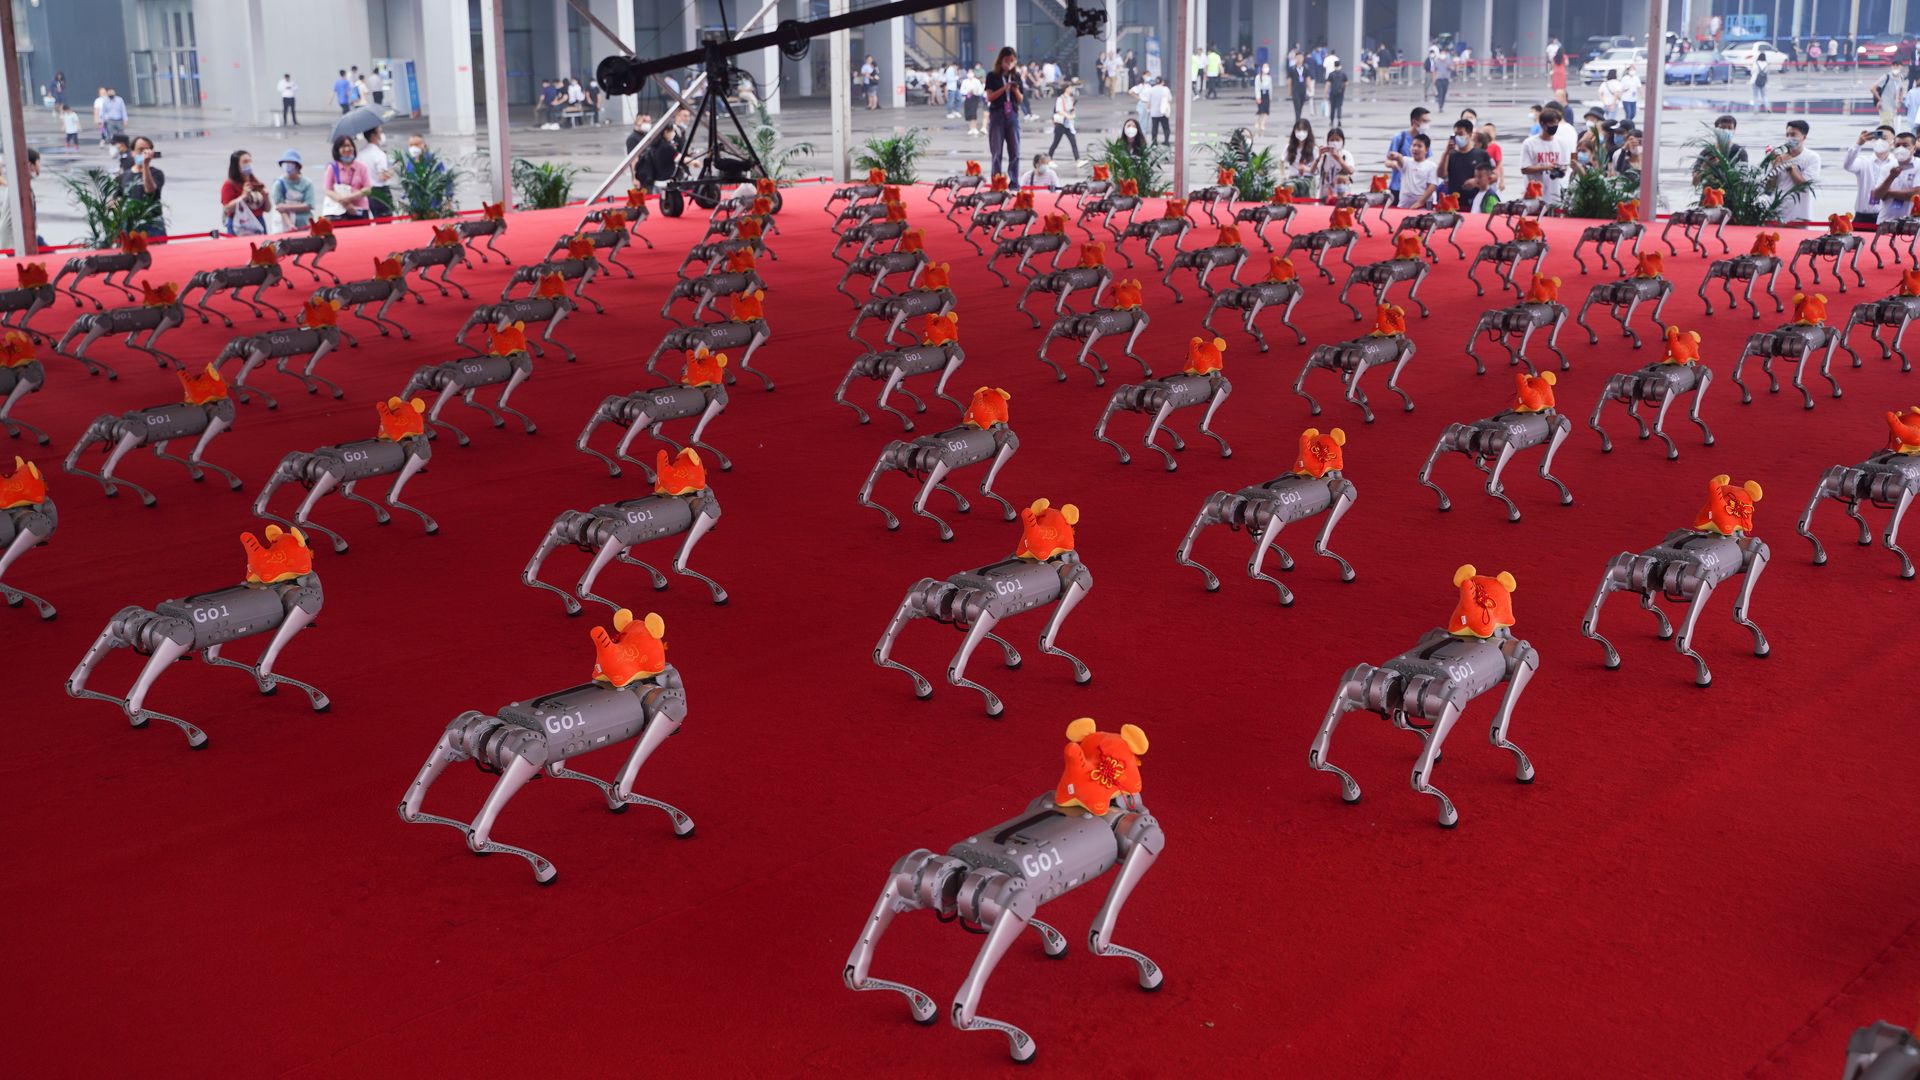 Robotic dogs stand in formation at a robotics conference in Beijing.